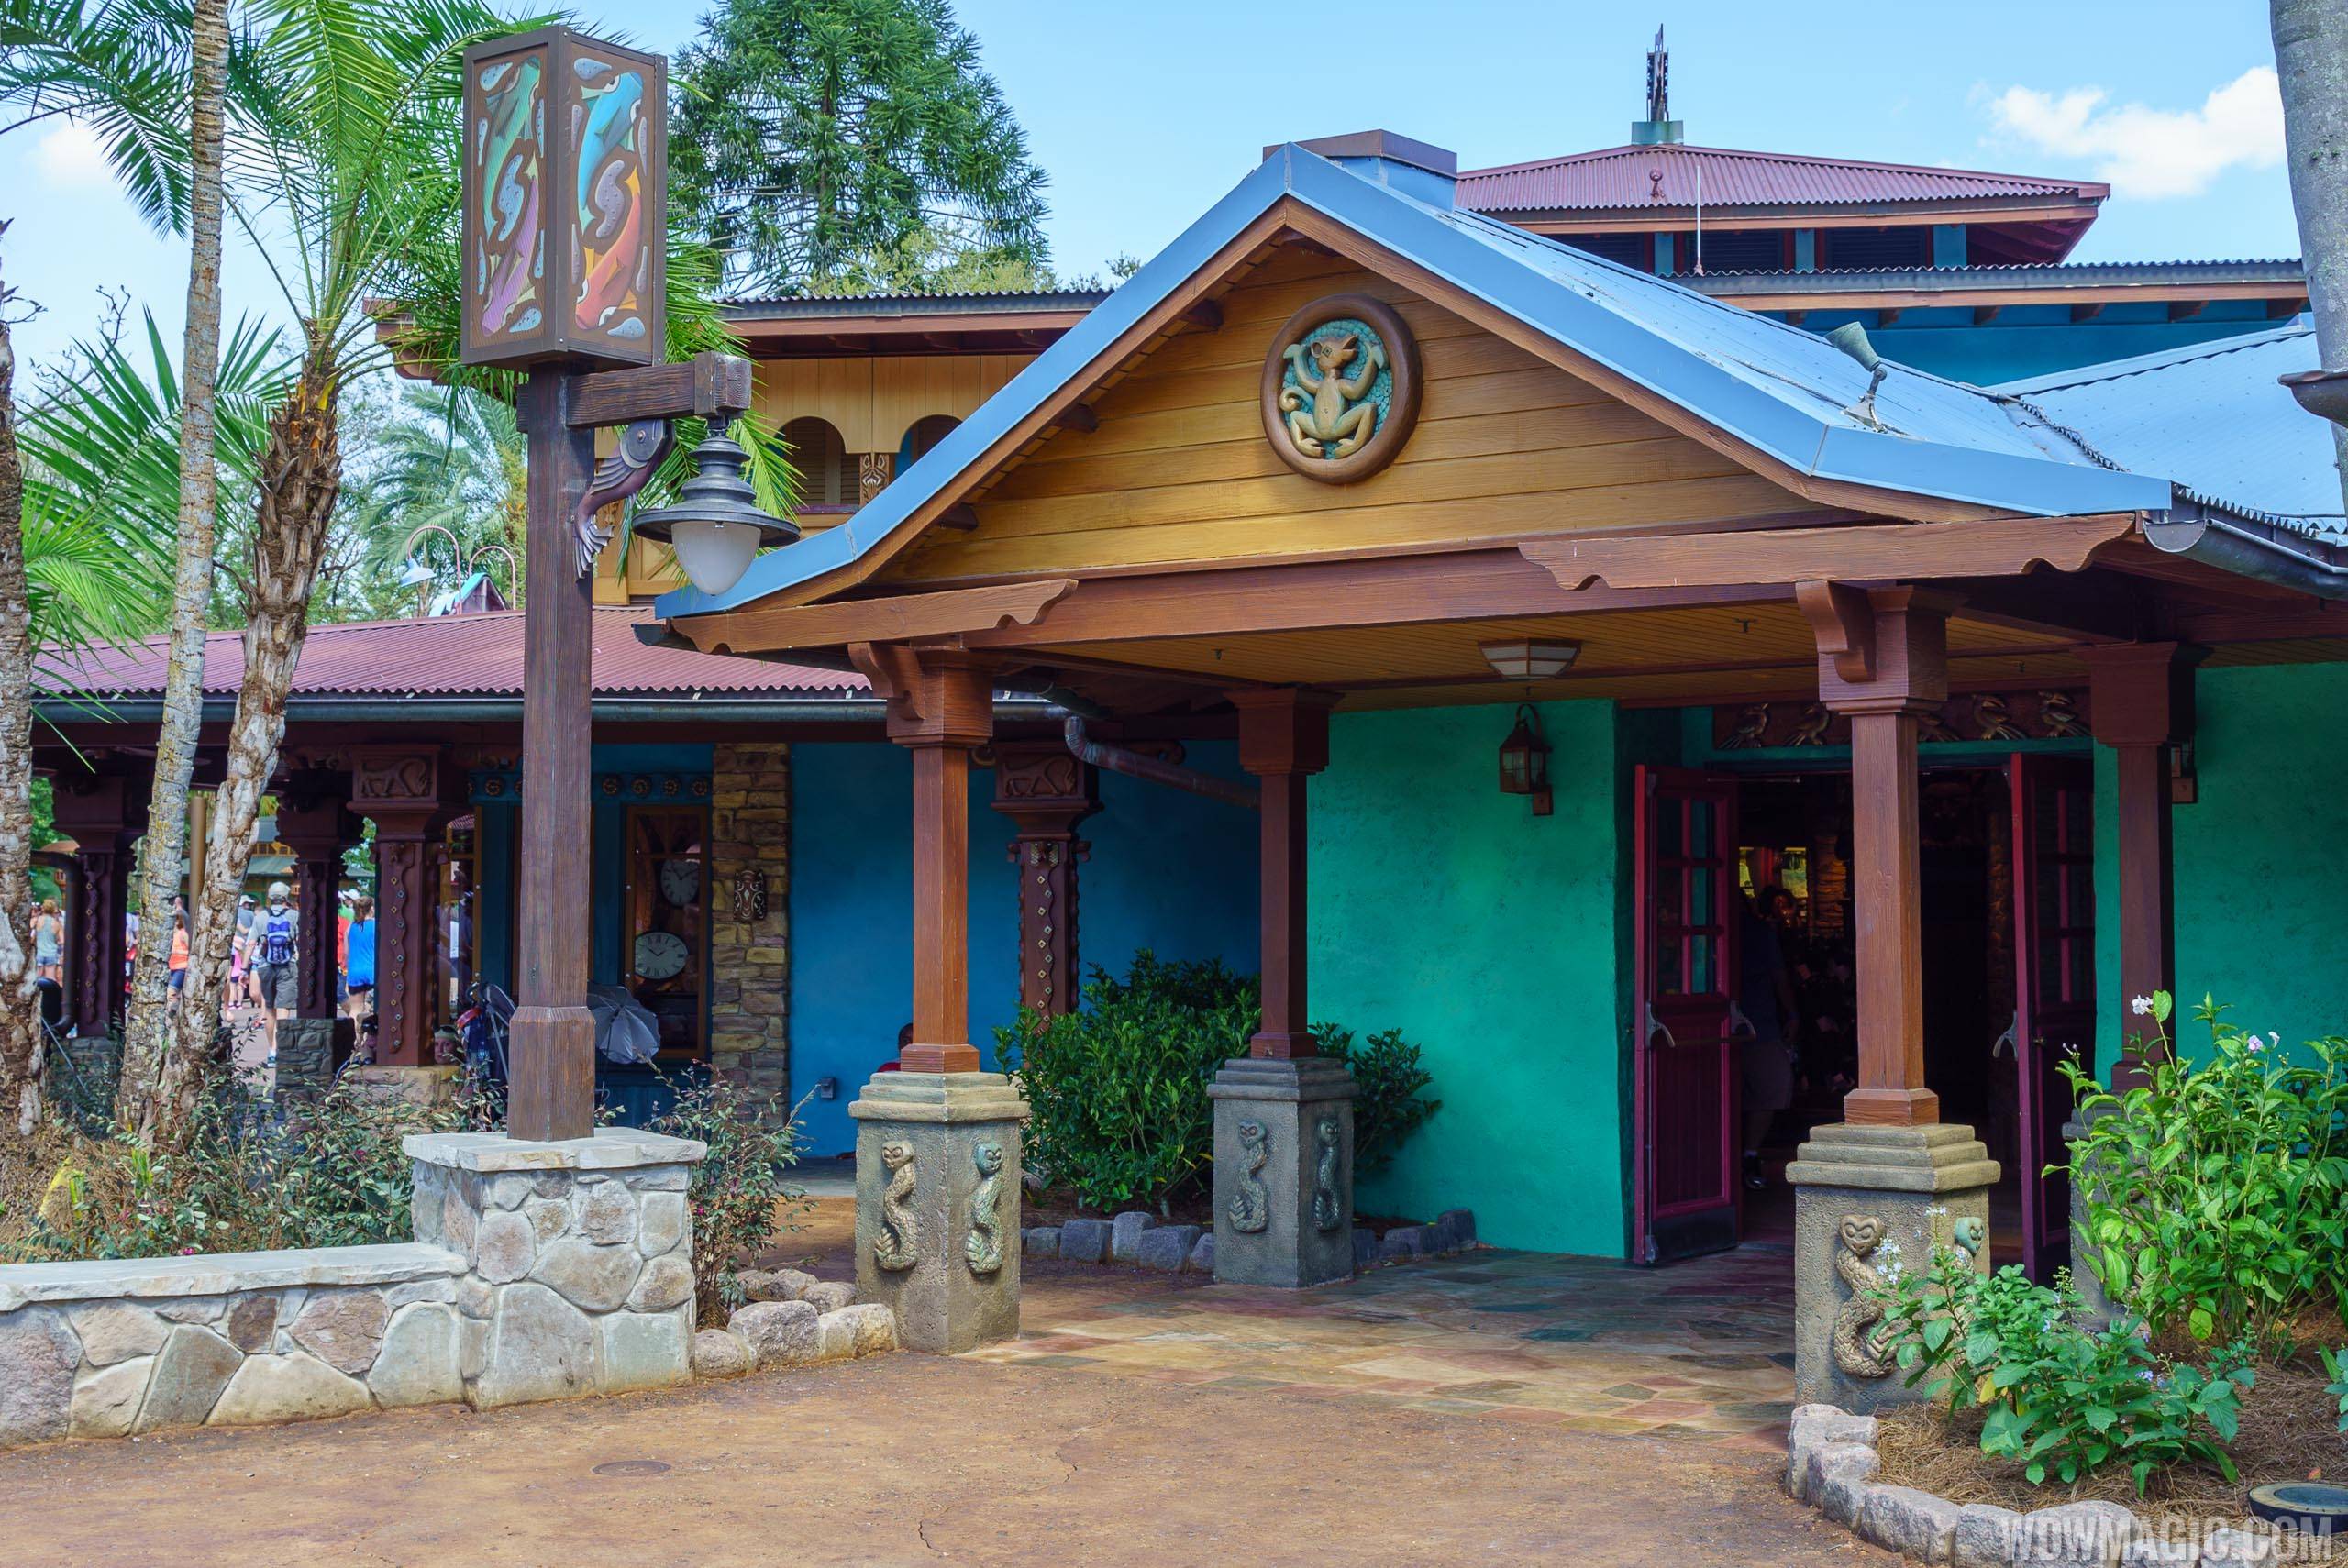 Disney Outfitters store expanding with new construction at Disney's Animal Kingdom